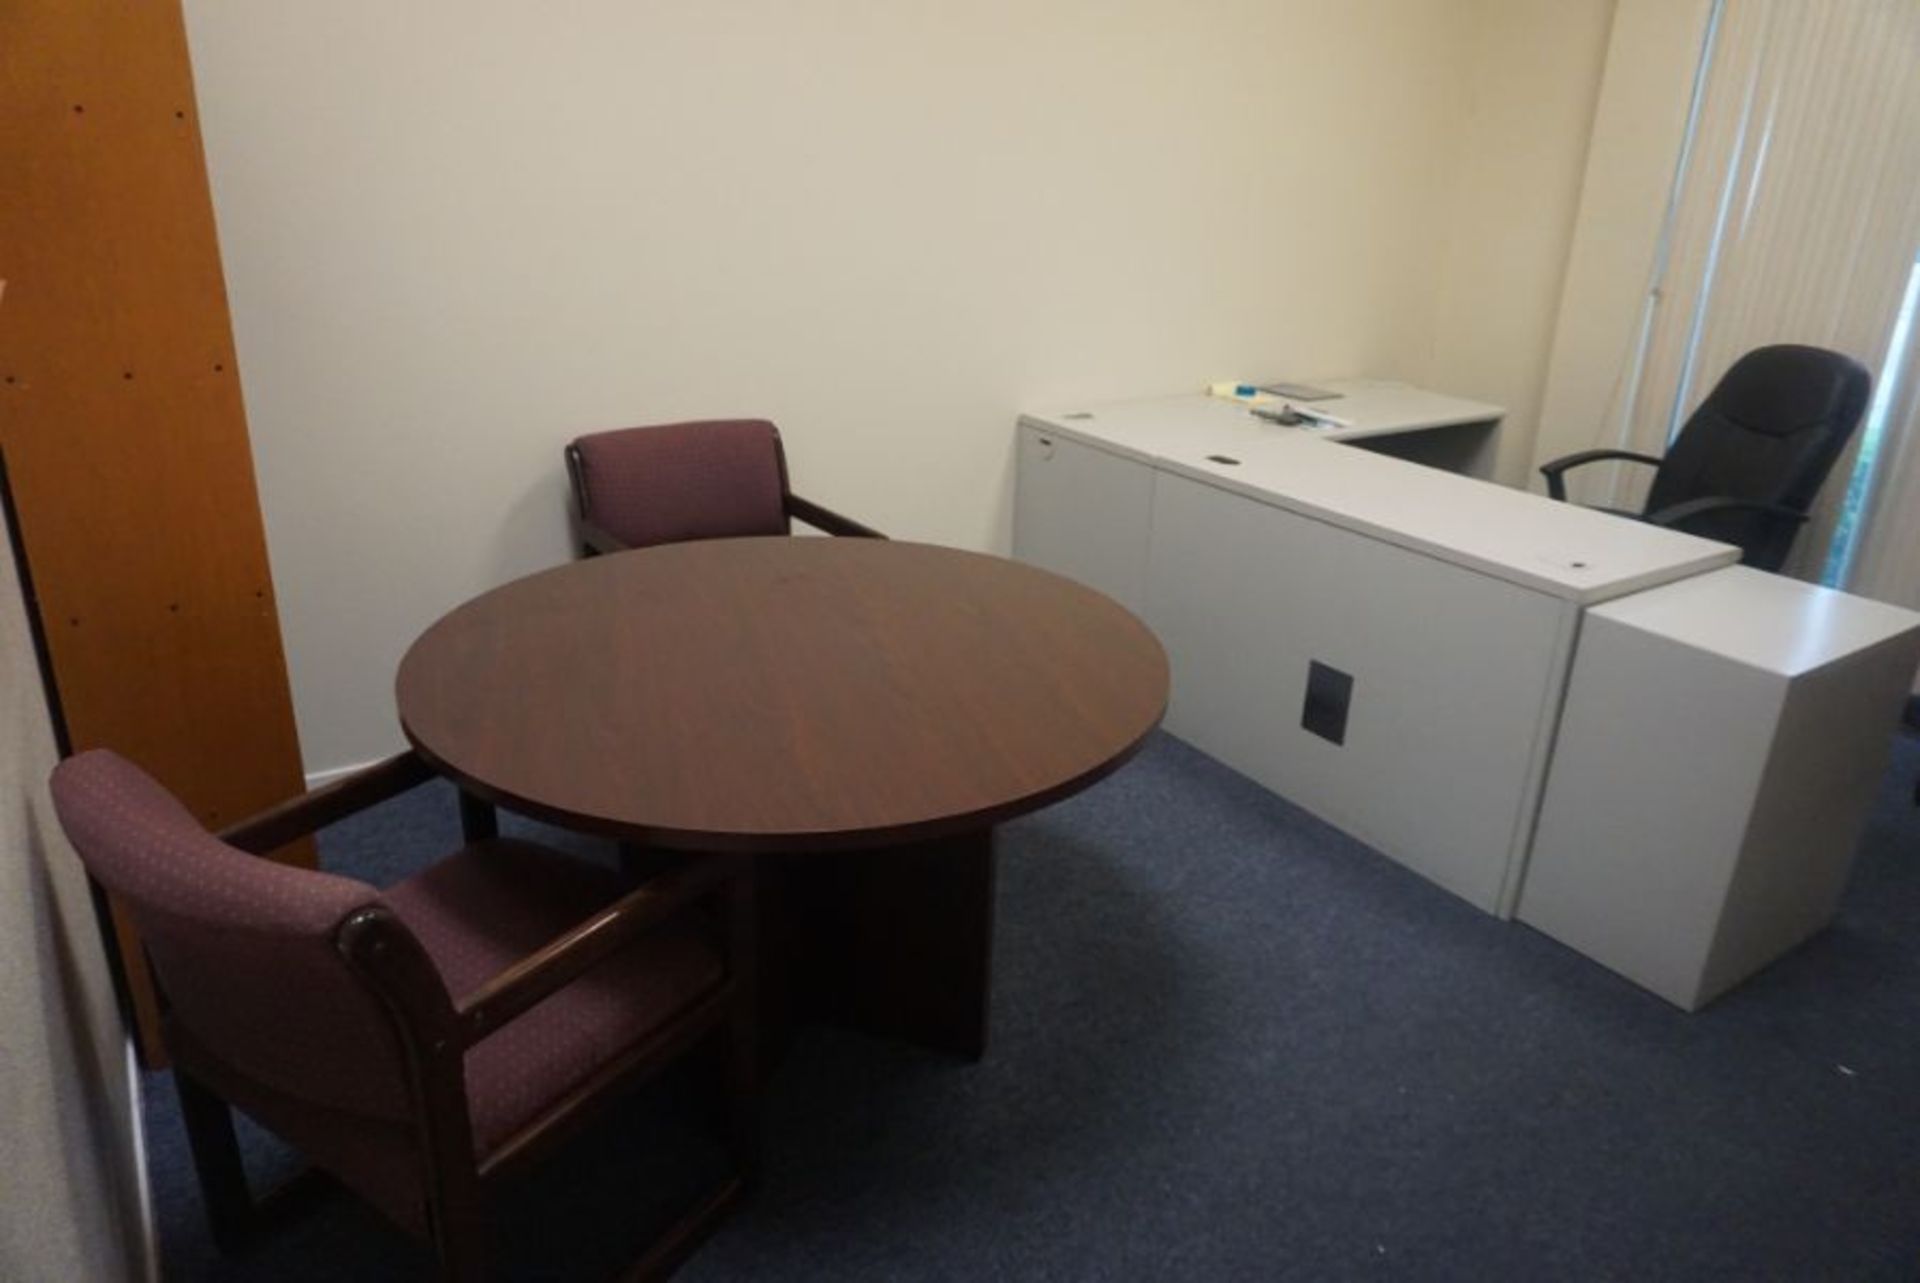 Room Content, Office Desk Chairs, and Book Shelf - Image 4 of 4